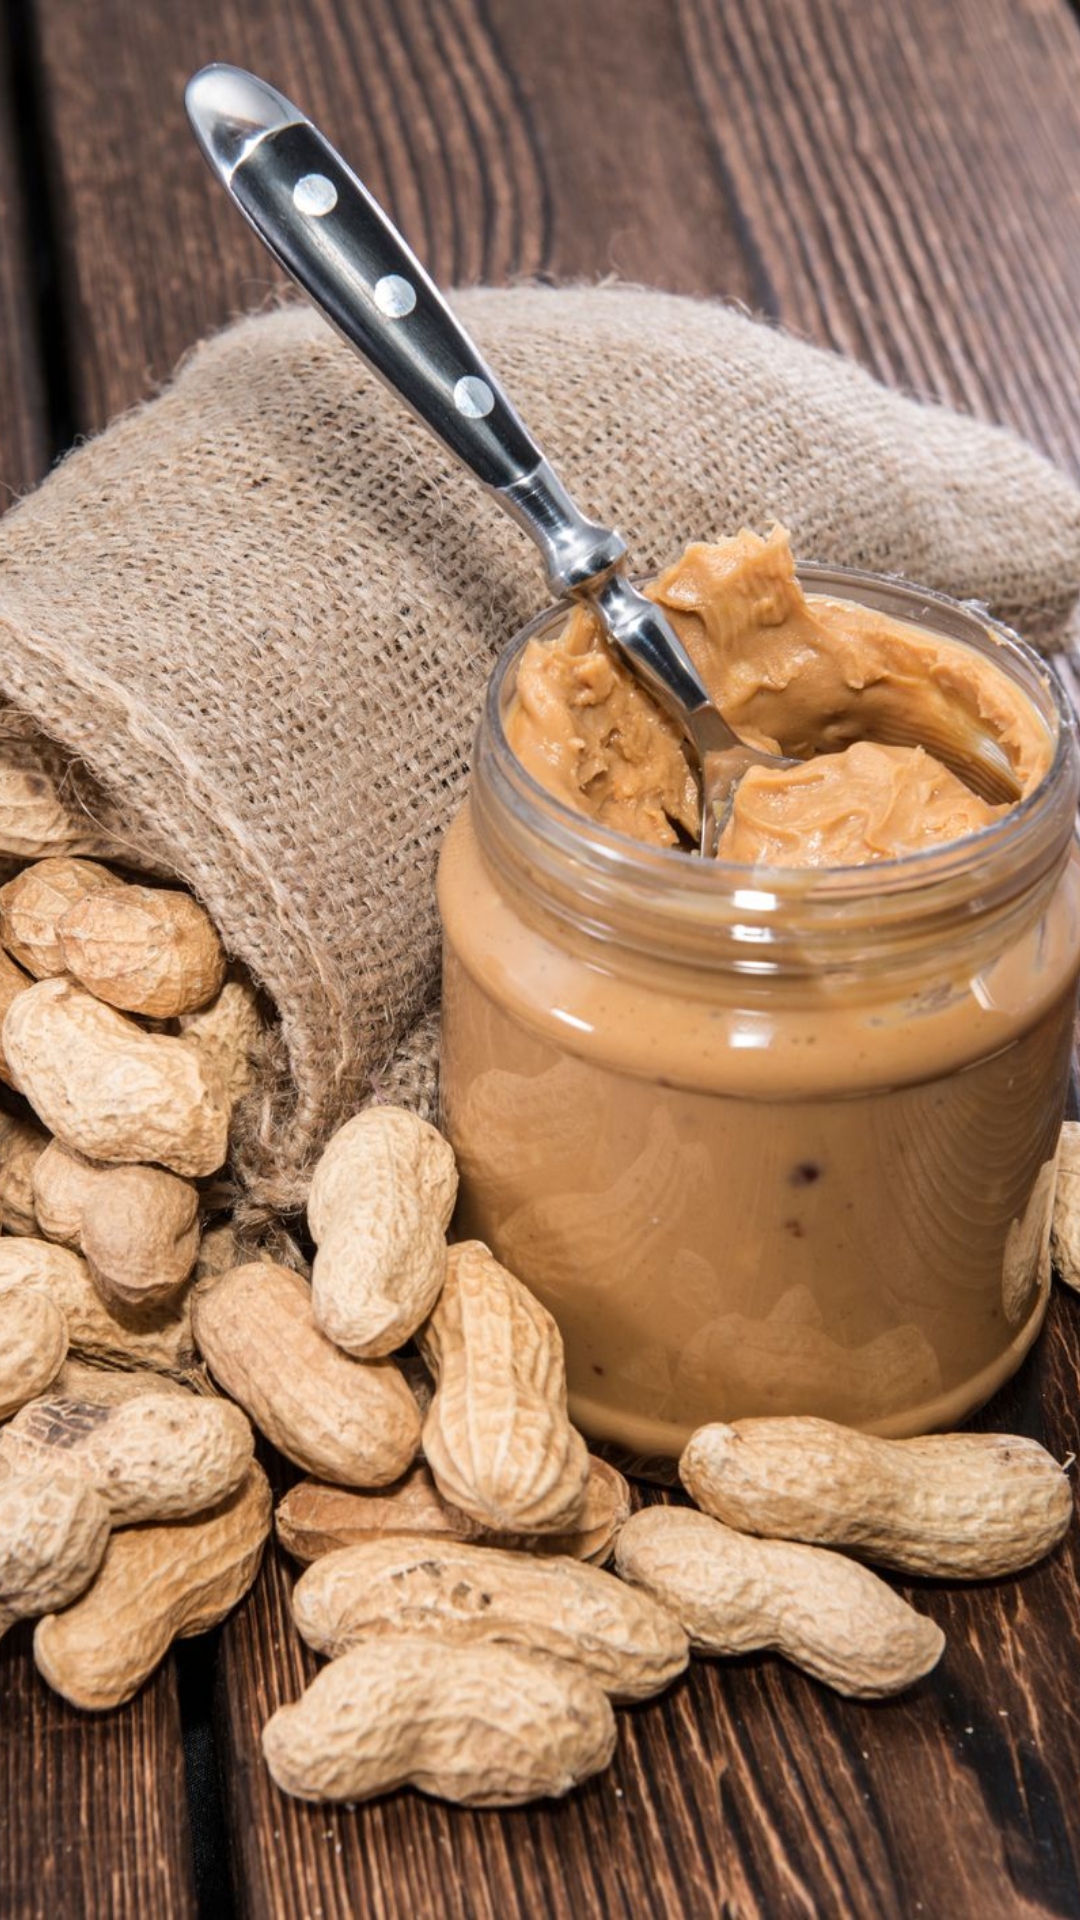 Inexpensive and healthy substitutes for peanut butter